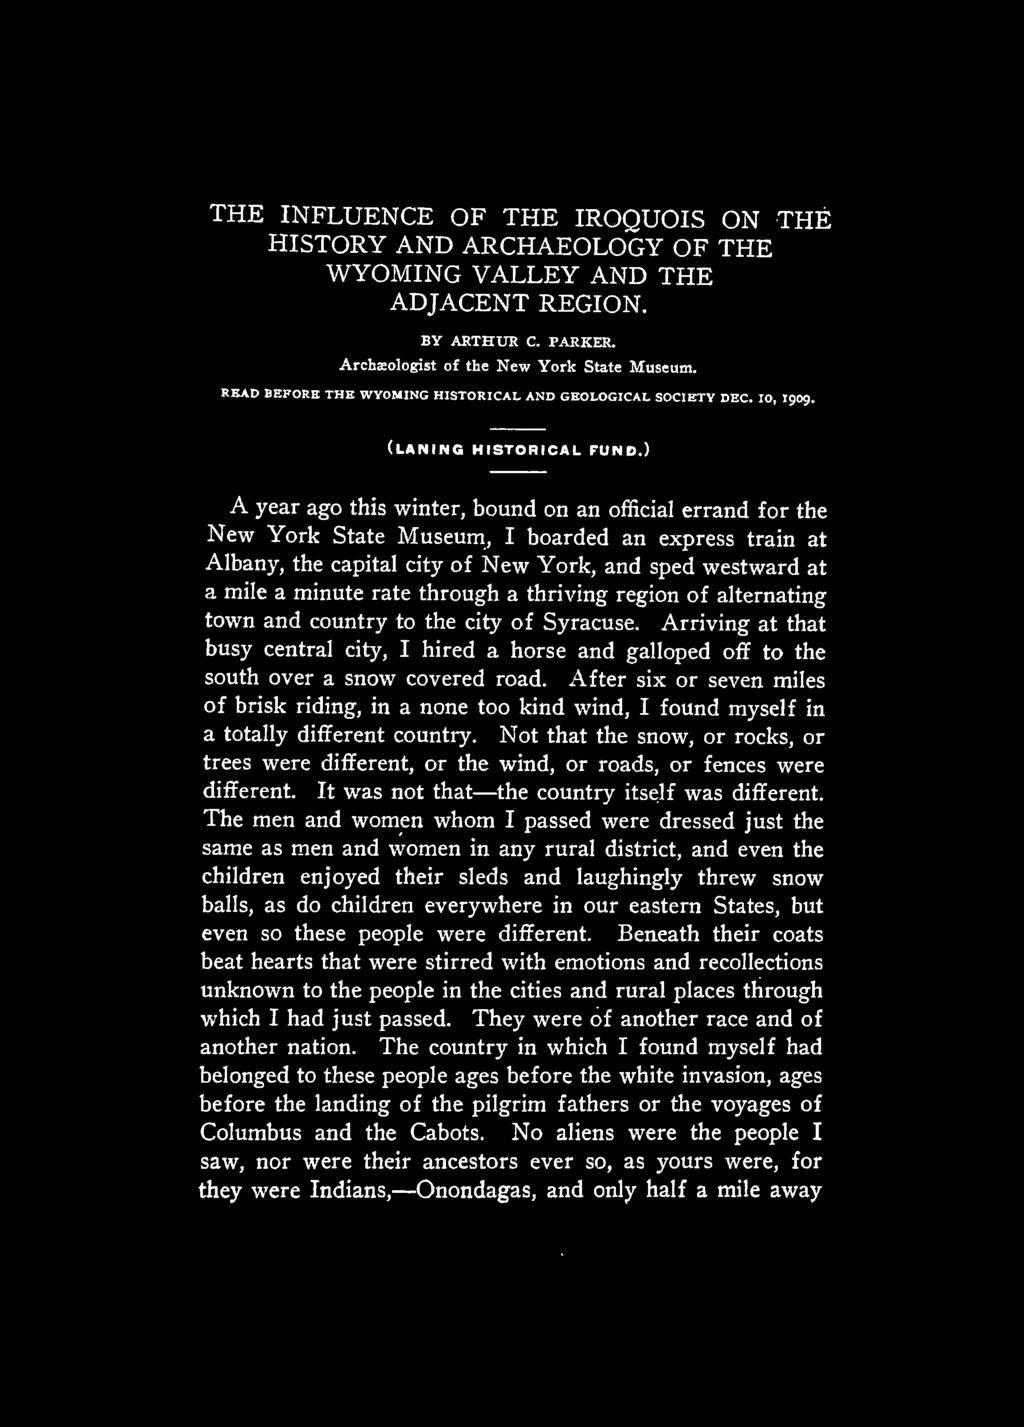 THE INFLUENCE OF THE IROQUOIS ON THE HISTORY AND ARCHAEOLOGY OF THE WYOMING VALLEY AND THE ADJACENT REGION. BY AETHUK C. PARKER. Archaeologist of the New York State Museum.